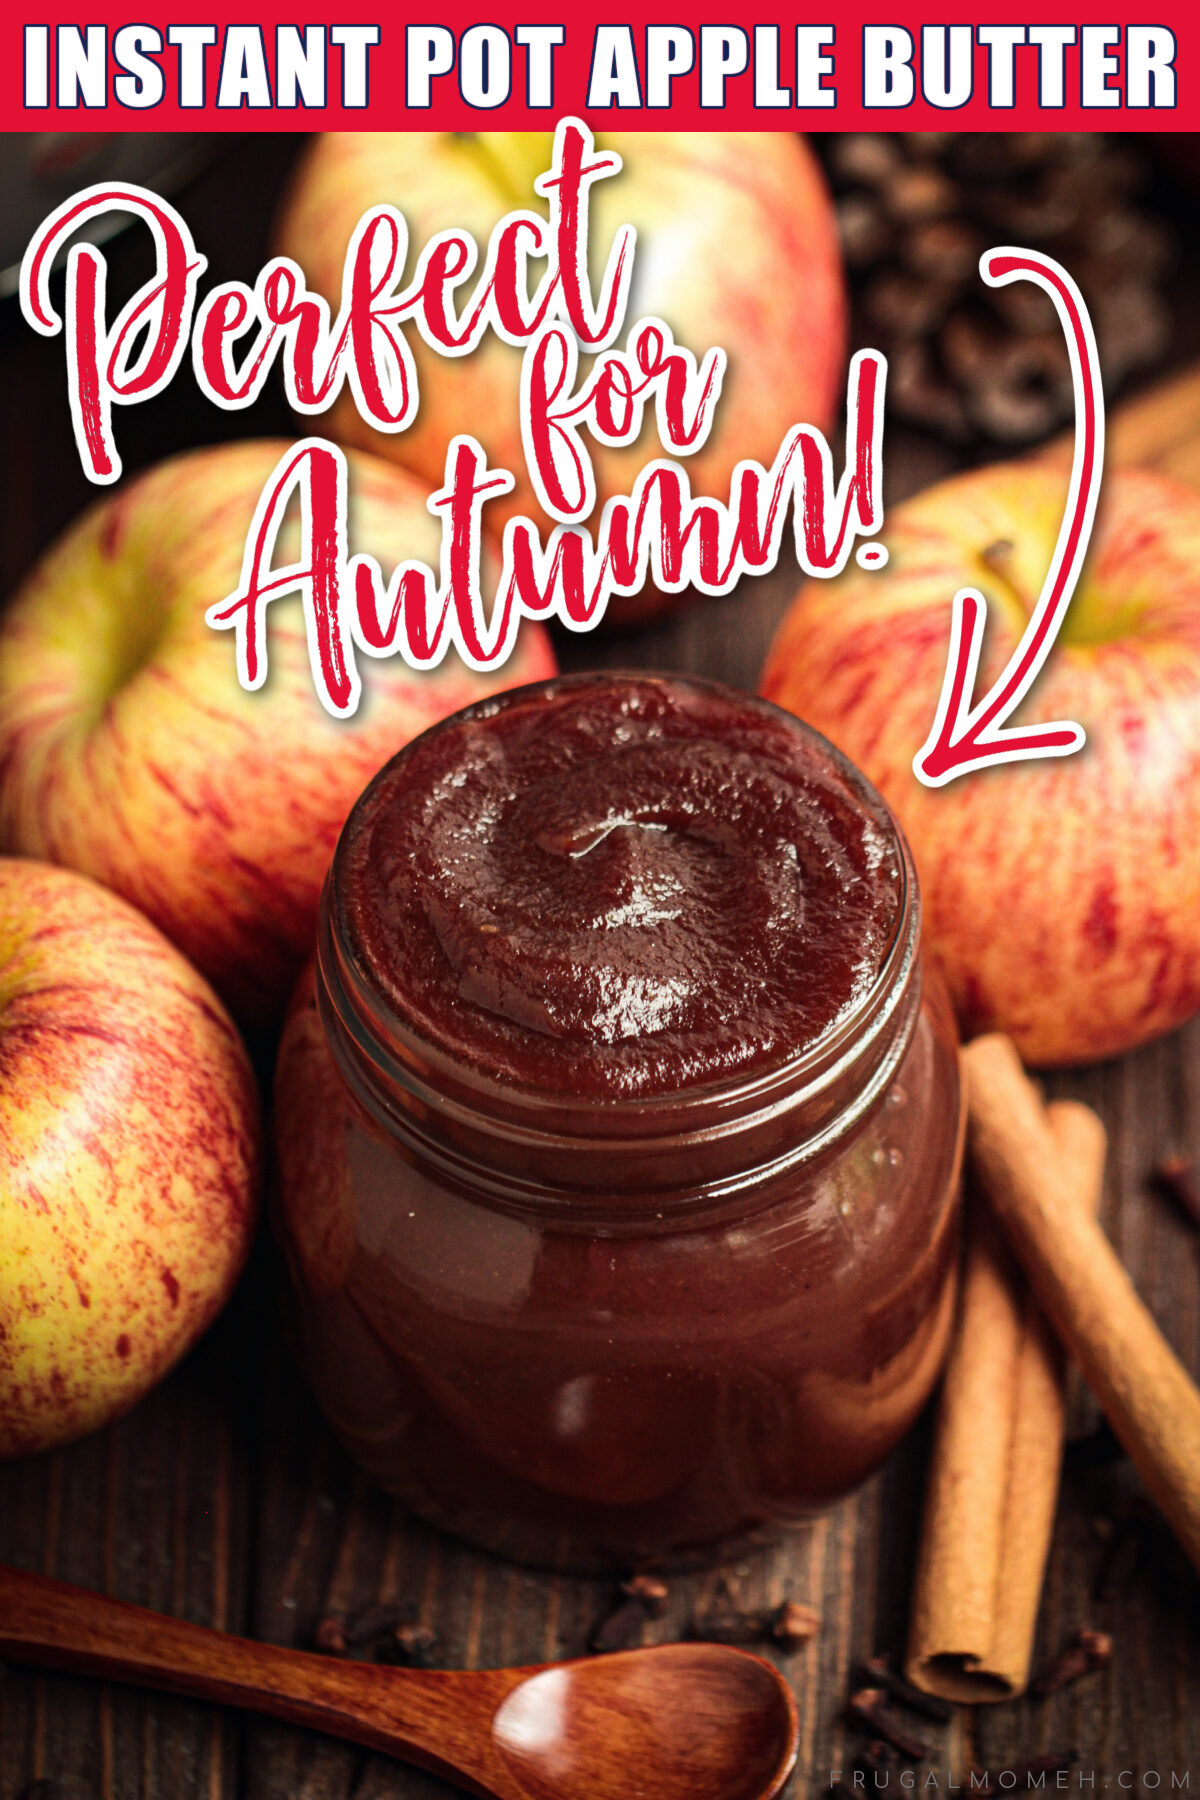 This Instant Pot apple butter recipe is perfect for fall! Made with just a few simple ingredients, it's a delicious way to use up apples.